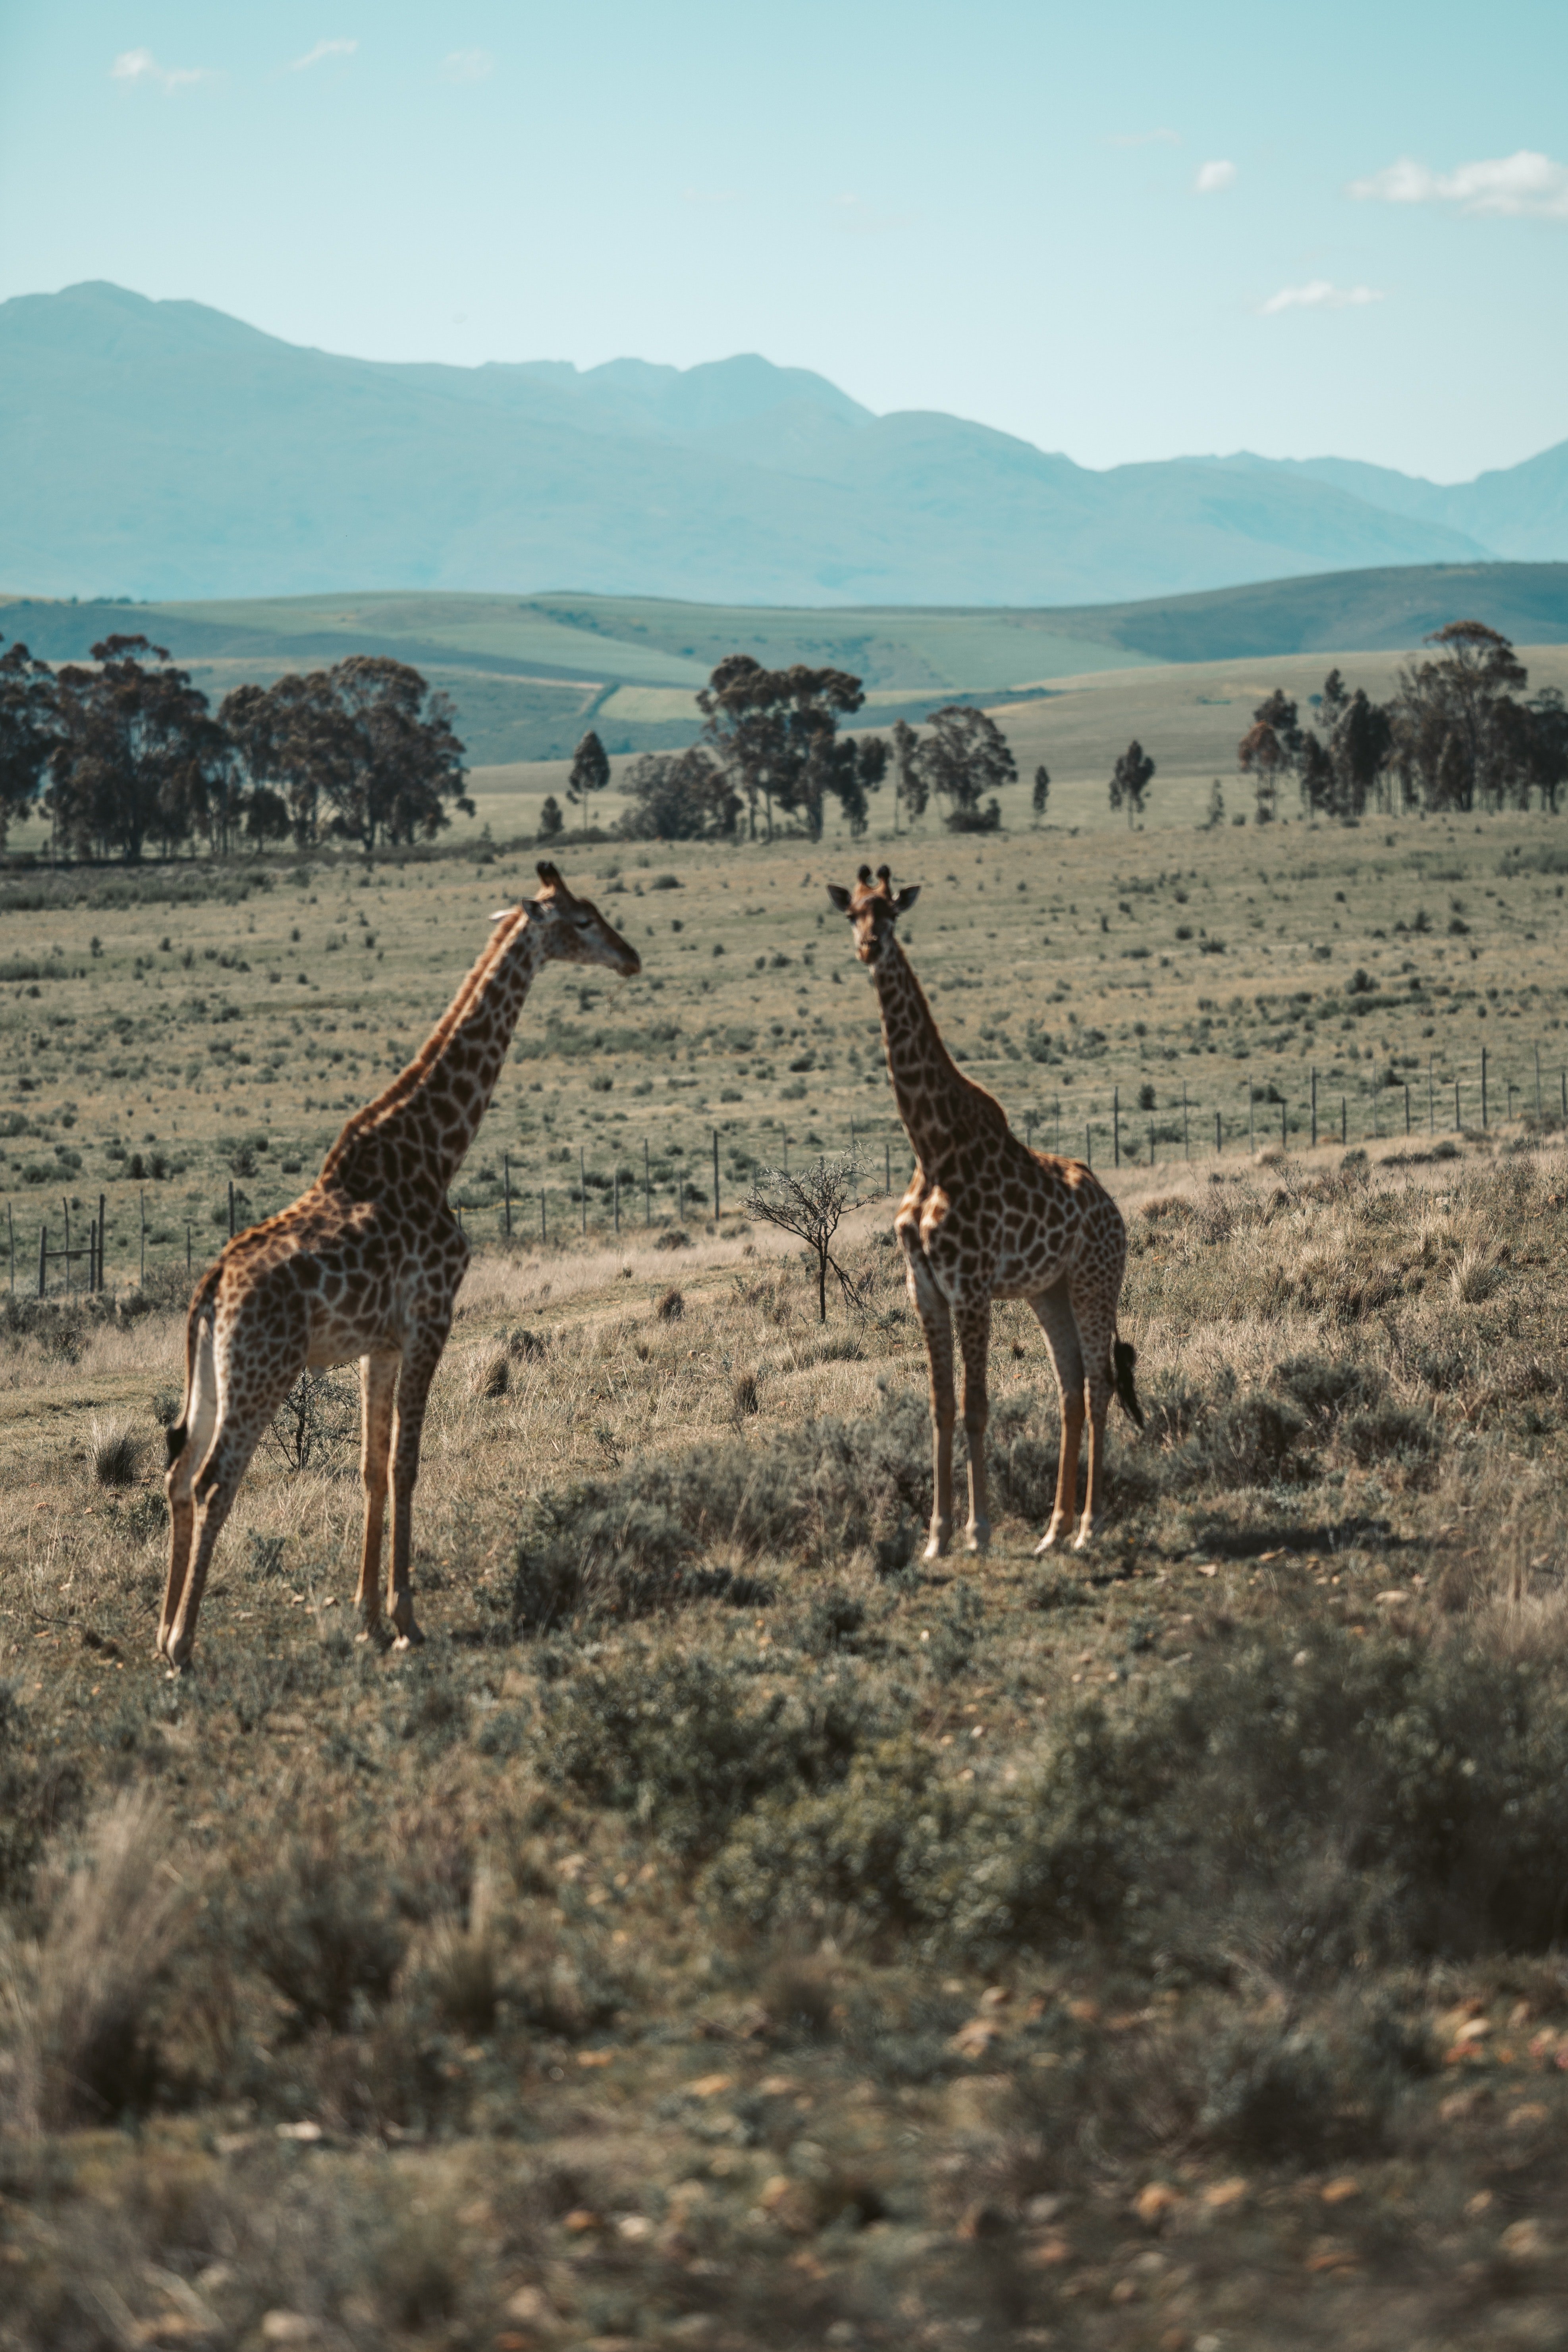 Two giraffes in the wild. | Photo: Pexels